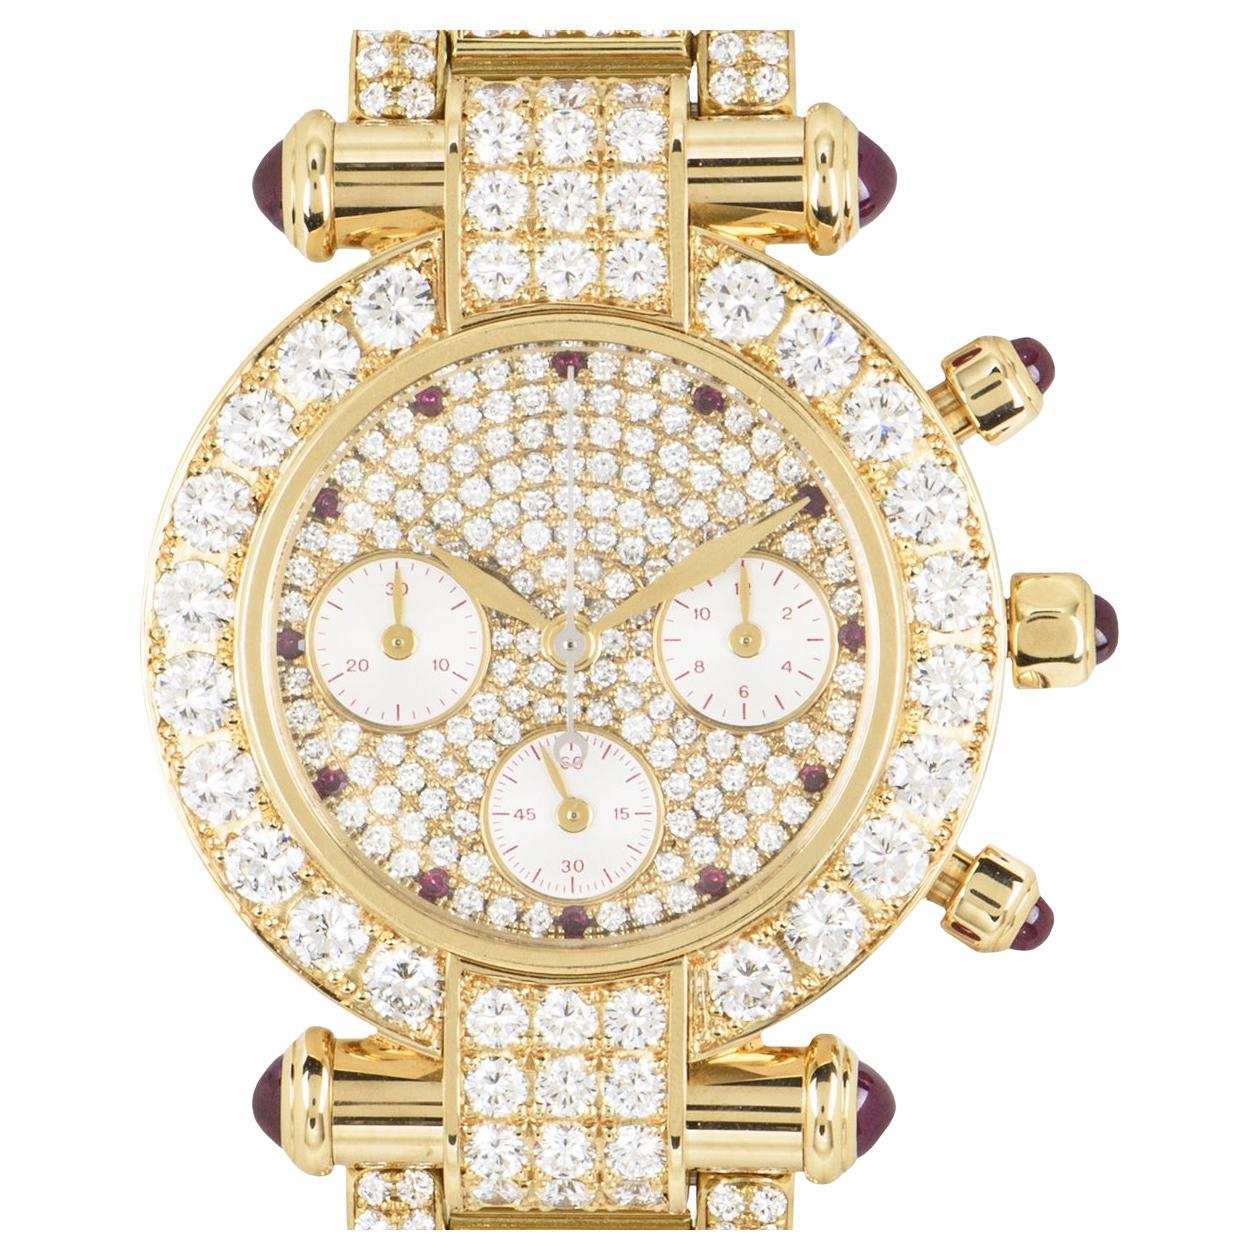 A striking ladies Imperiale wristwatch, crafted in yellow gold by Chopard. Features a pave diamond dial with 11 round cut ruby hour markers and 3 sub dials. Complementing the dial is a fixed yellow gold bezel and lugs which are set with round